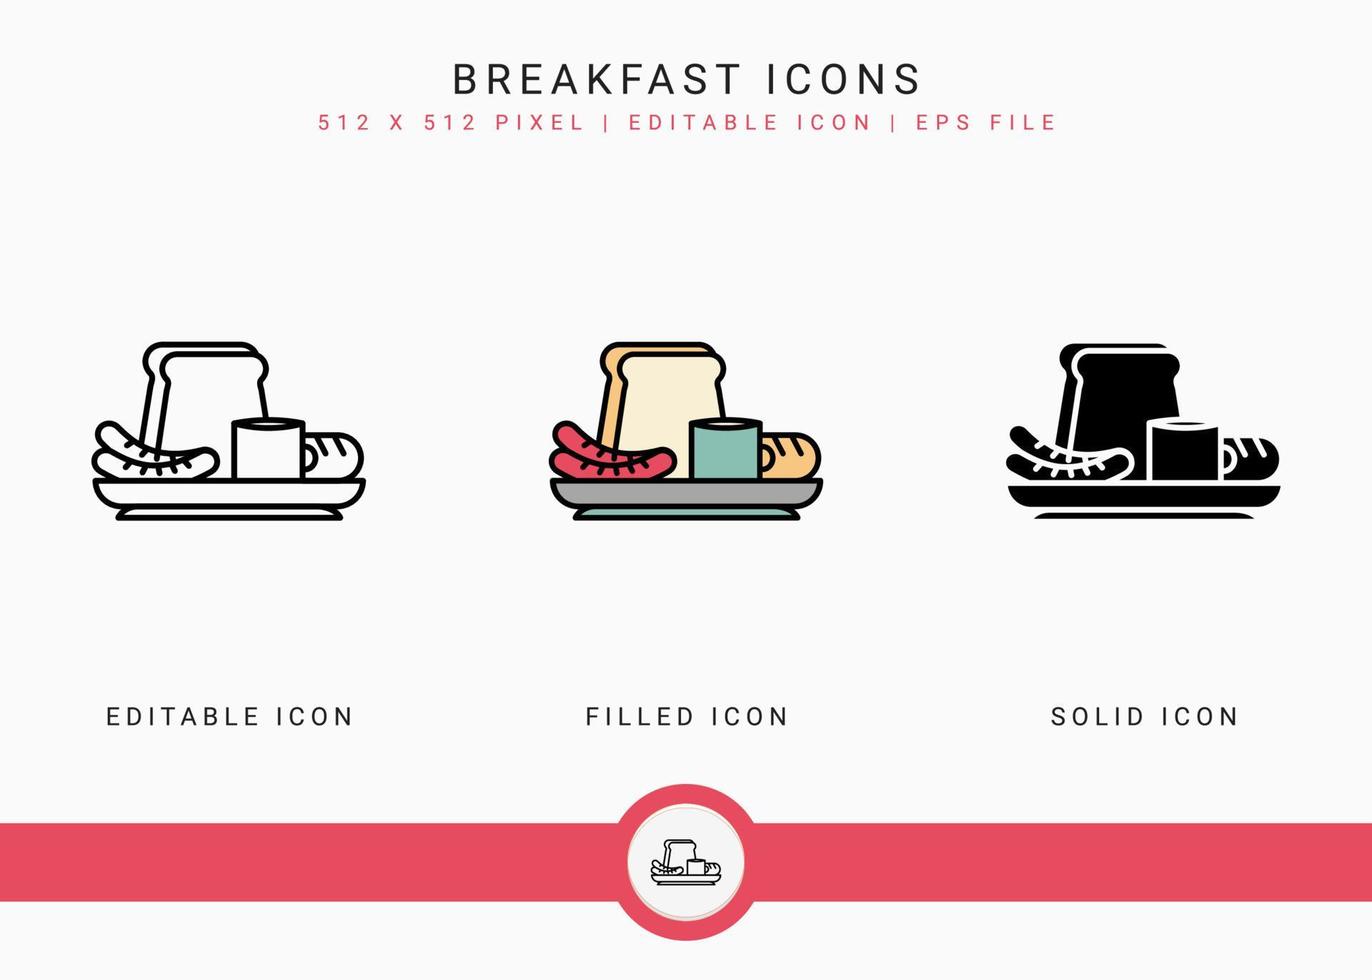 Breakfast icons set vector illustration with solid icon line style. Bread and sausage food plate concept. Editable stroke icon on isolated background for web design, infographic and UI mobile app.